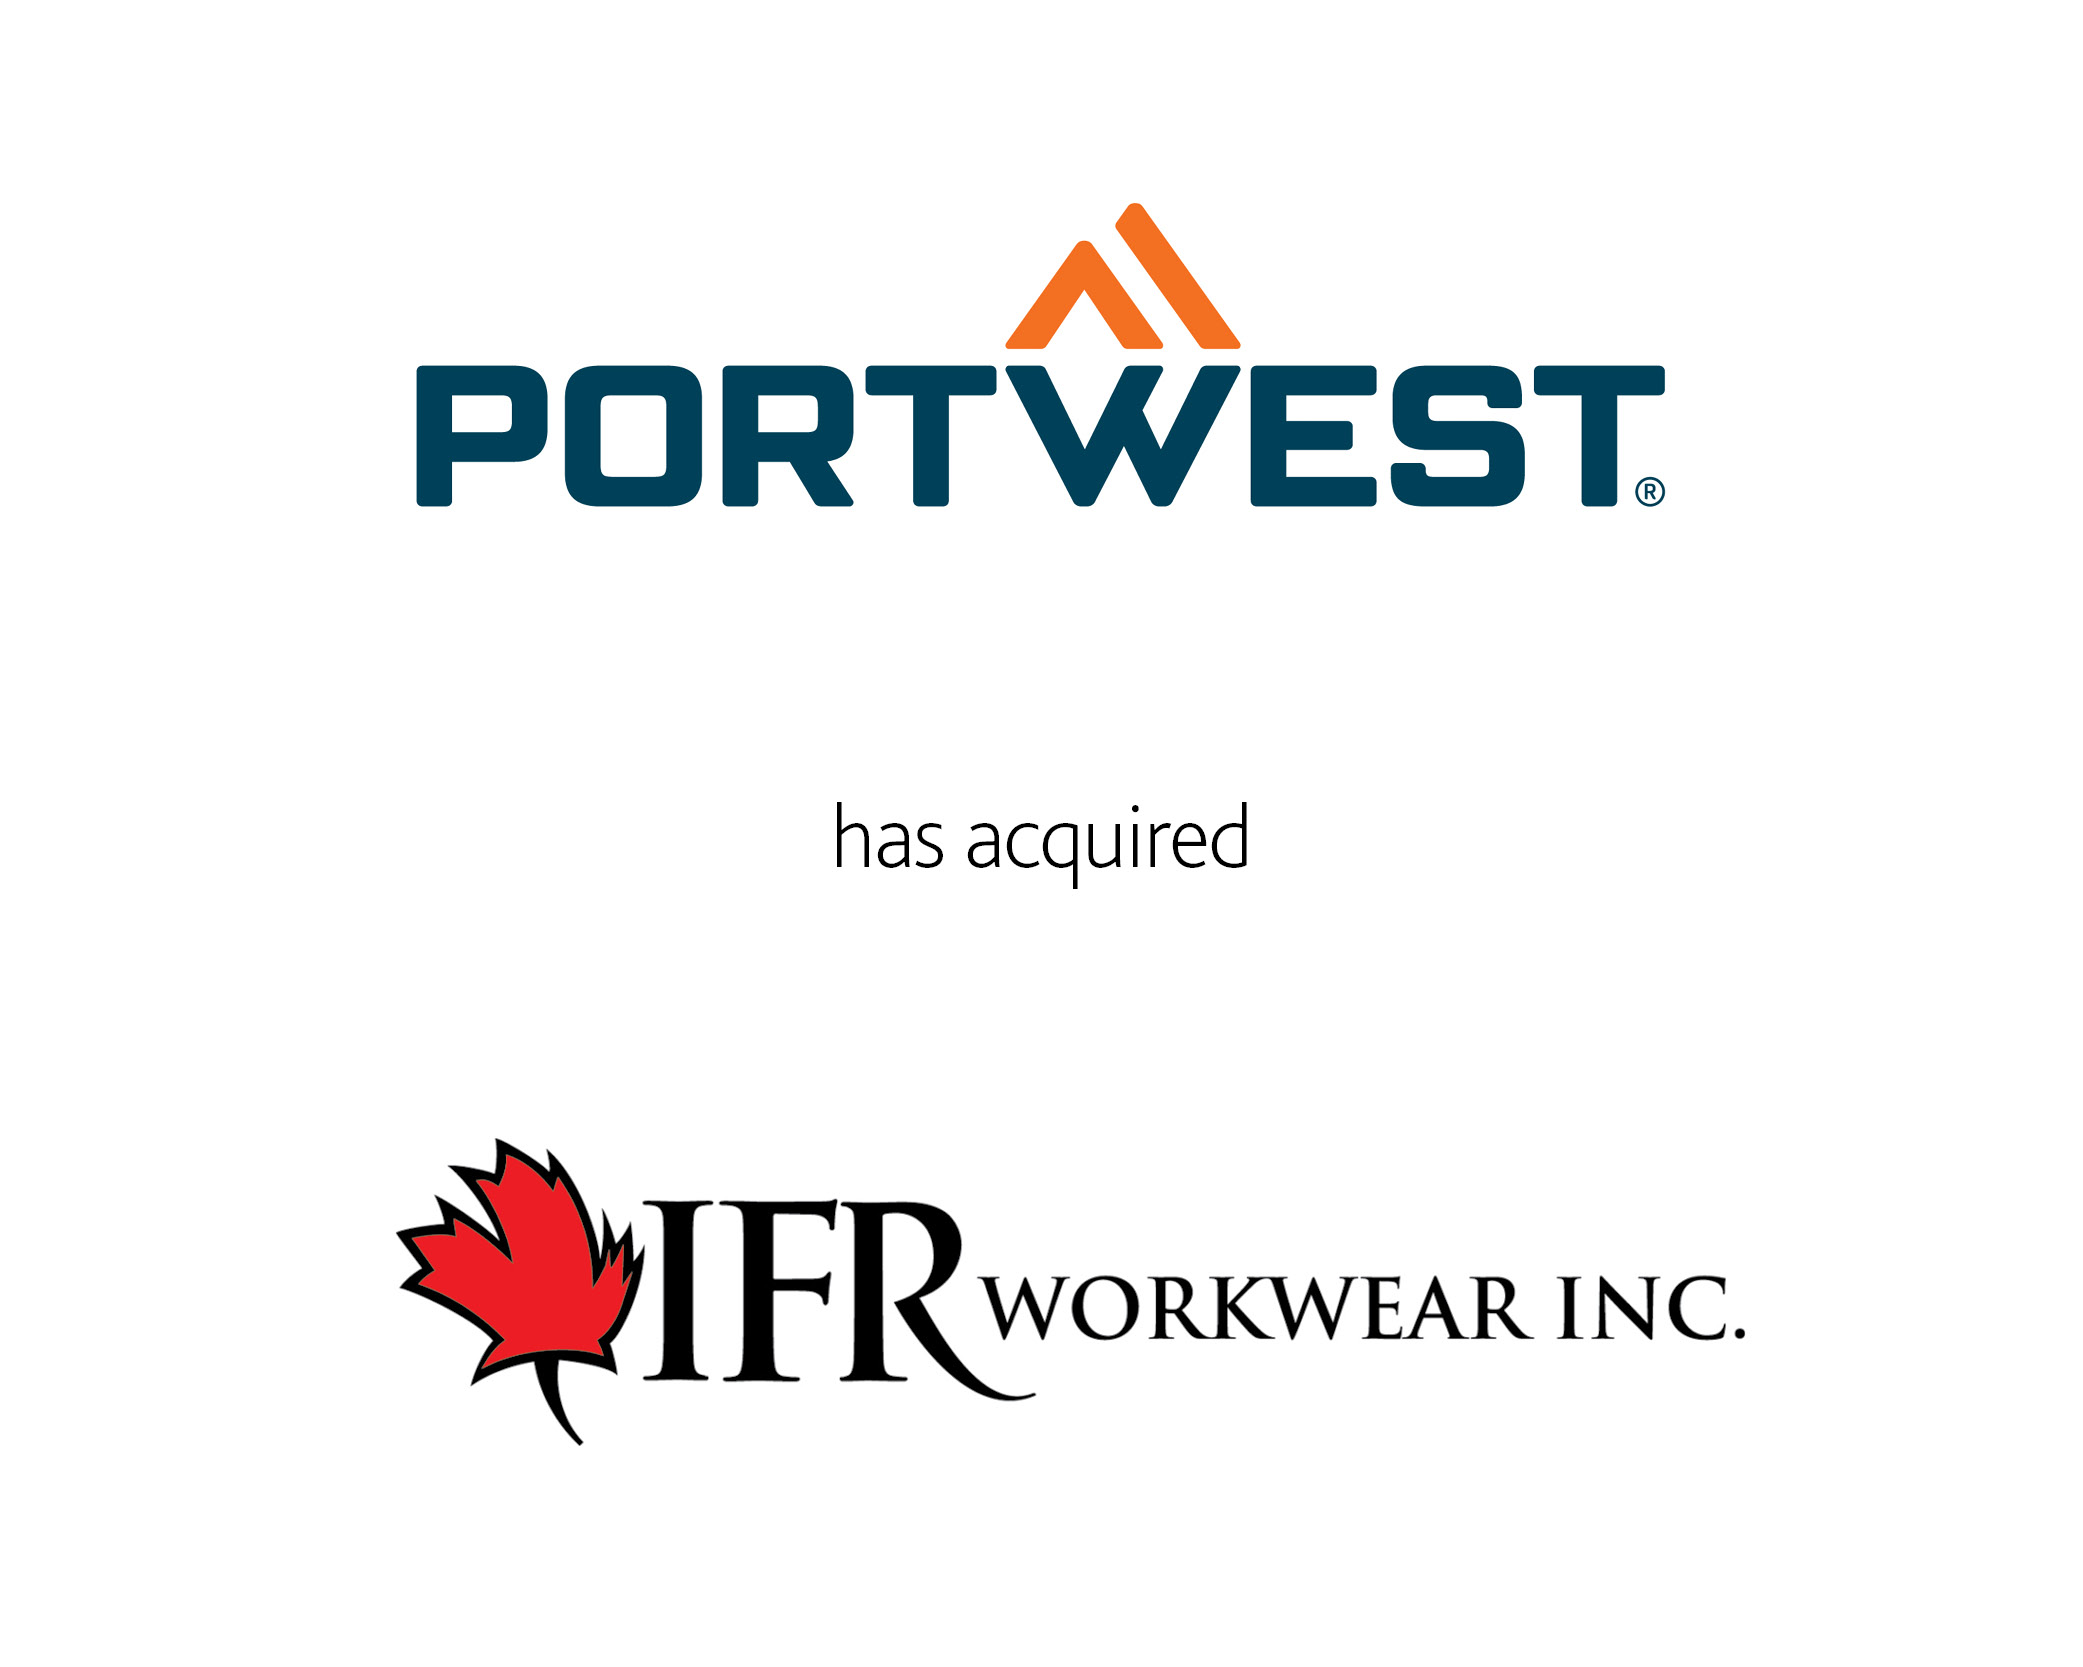 Portwest has acquired IFR Workwear inc.